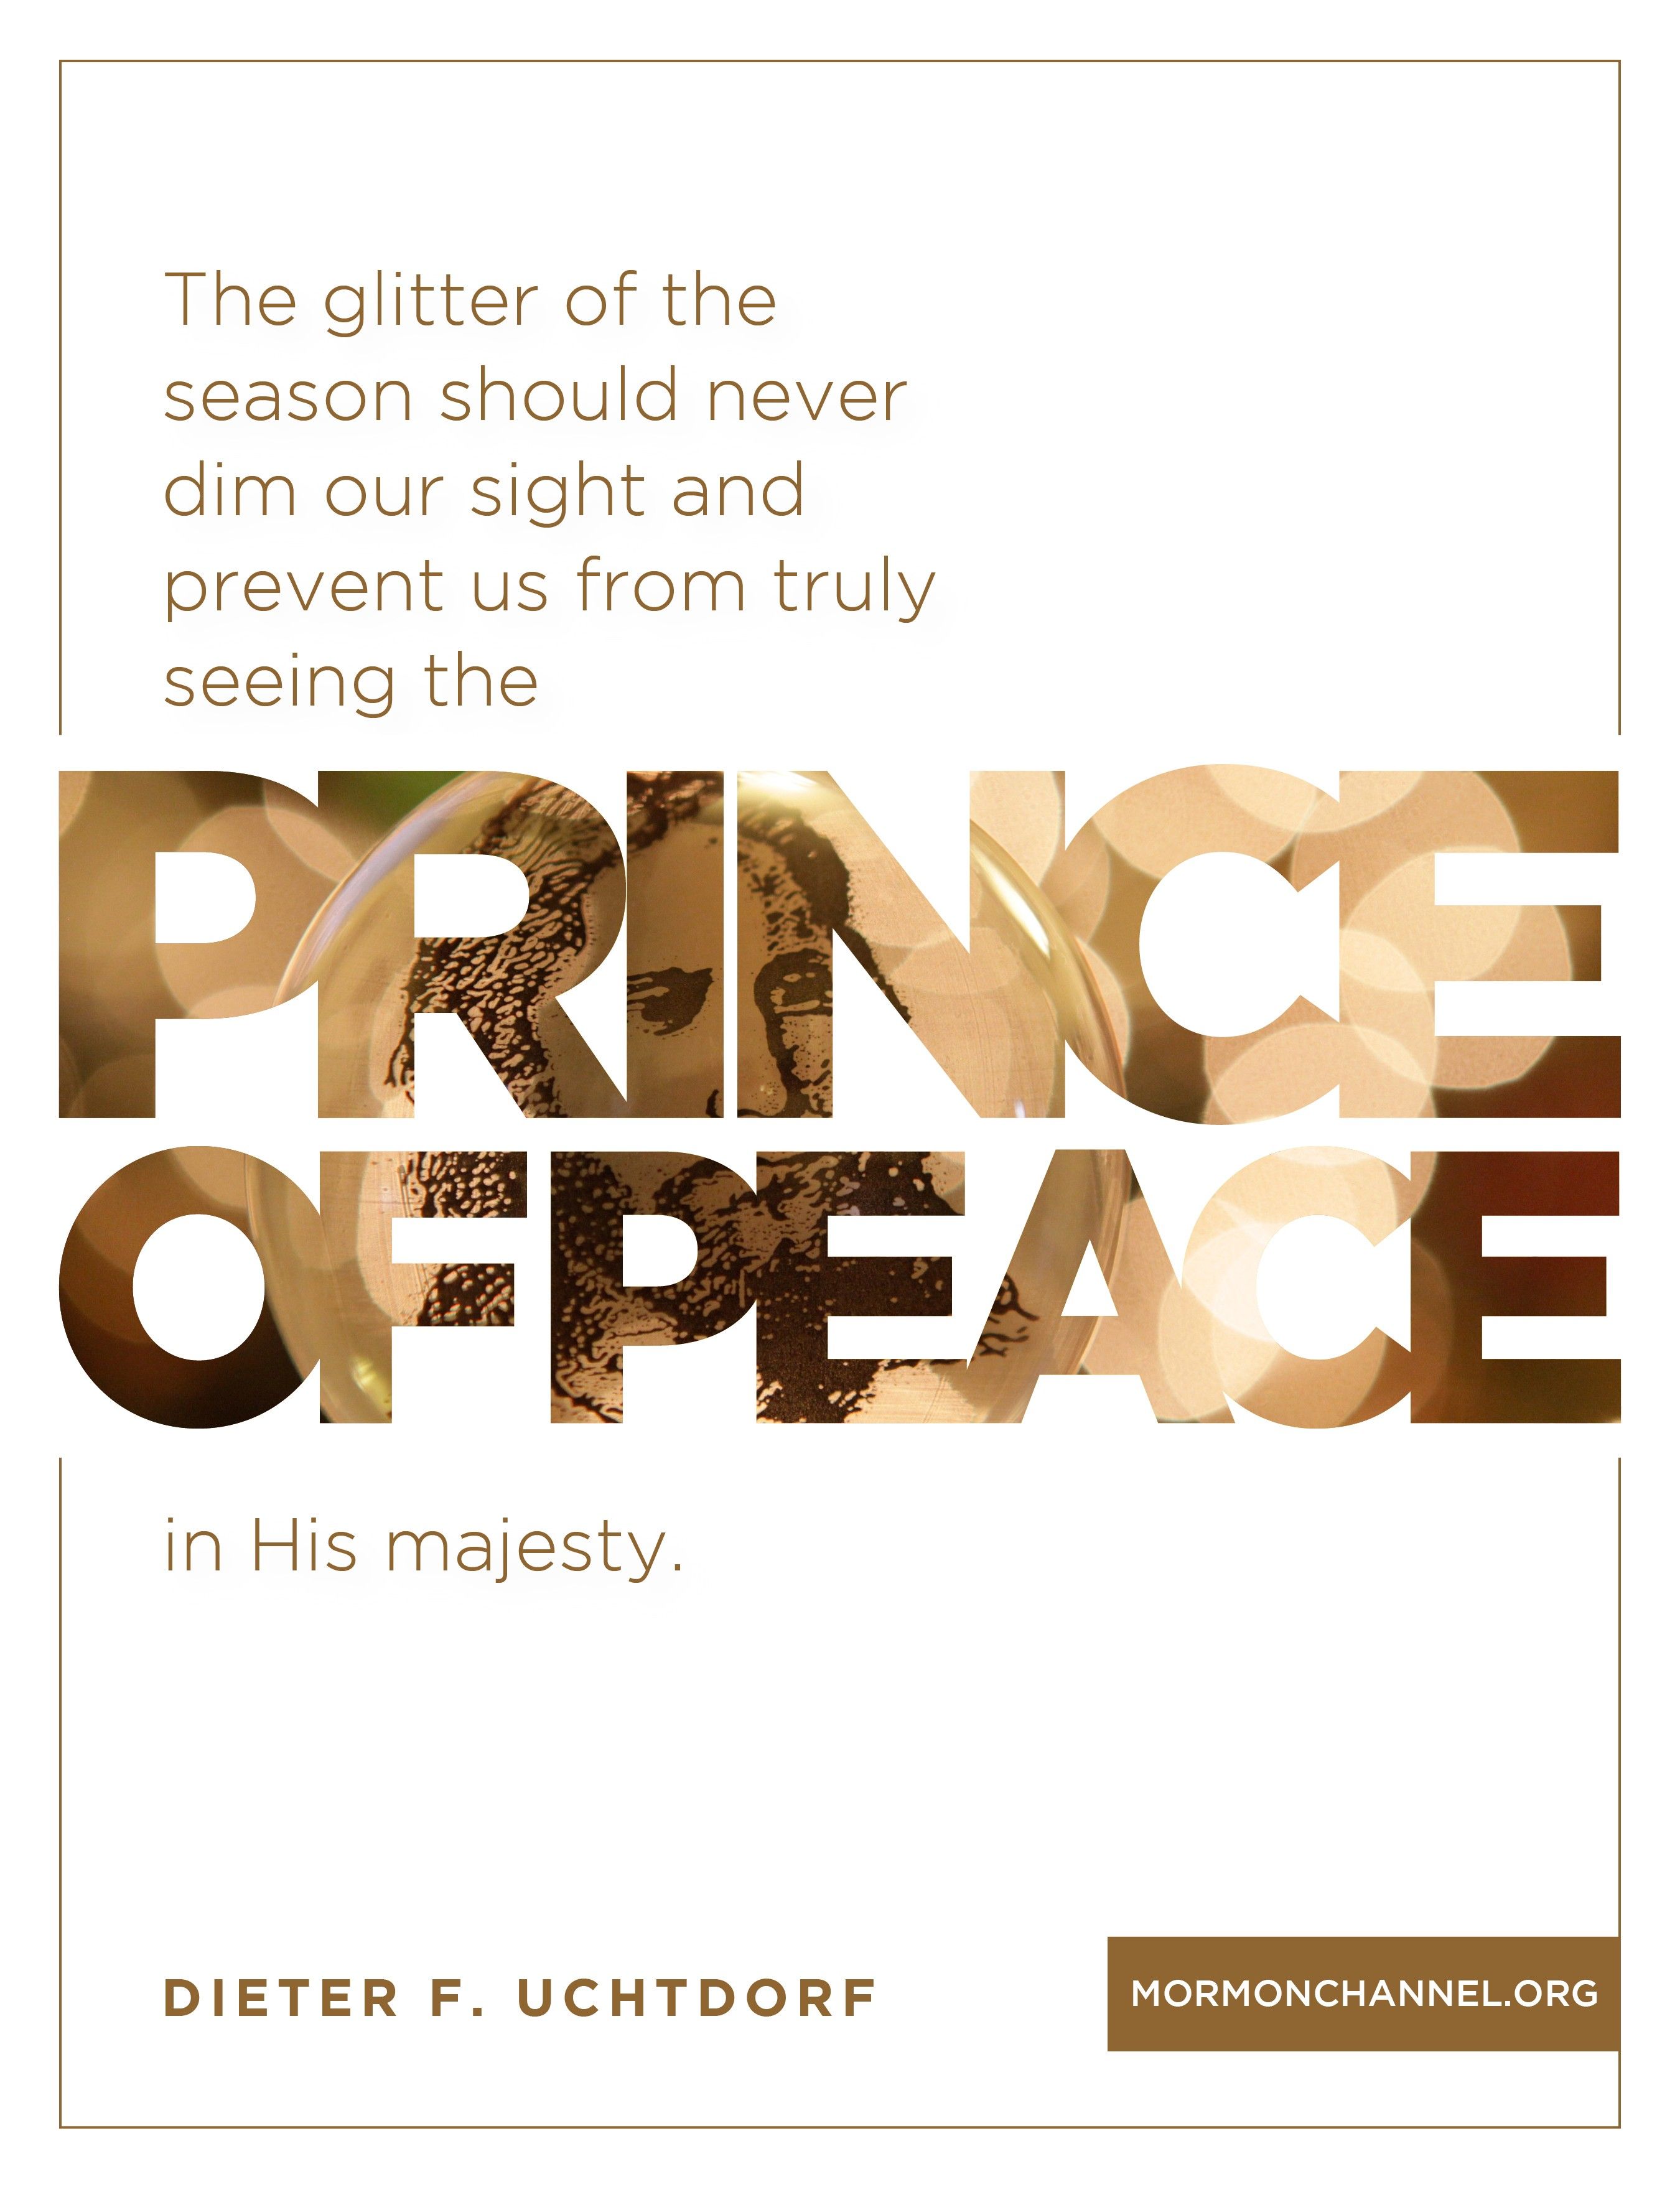 “The glitter of the season should never dim our sight and prevent us from truly seeing the Prince of Peace in His majesty.”—President Dieter F. Uchtdorf, “Can We See the Christ?” © undefined ipCode 1.